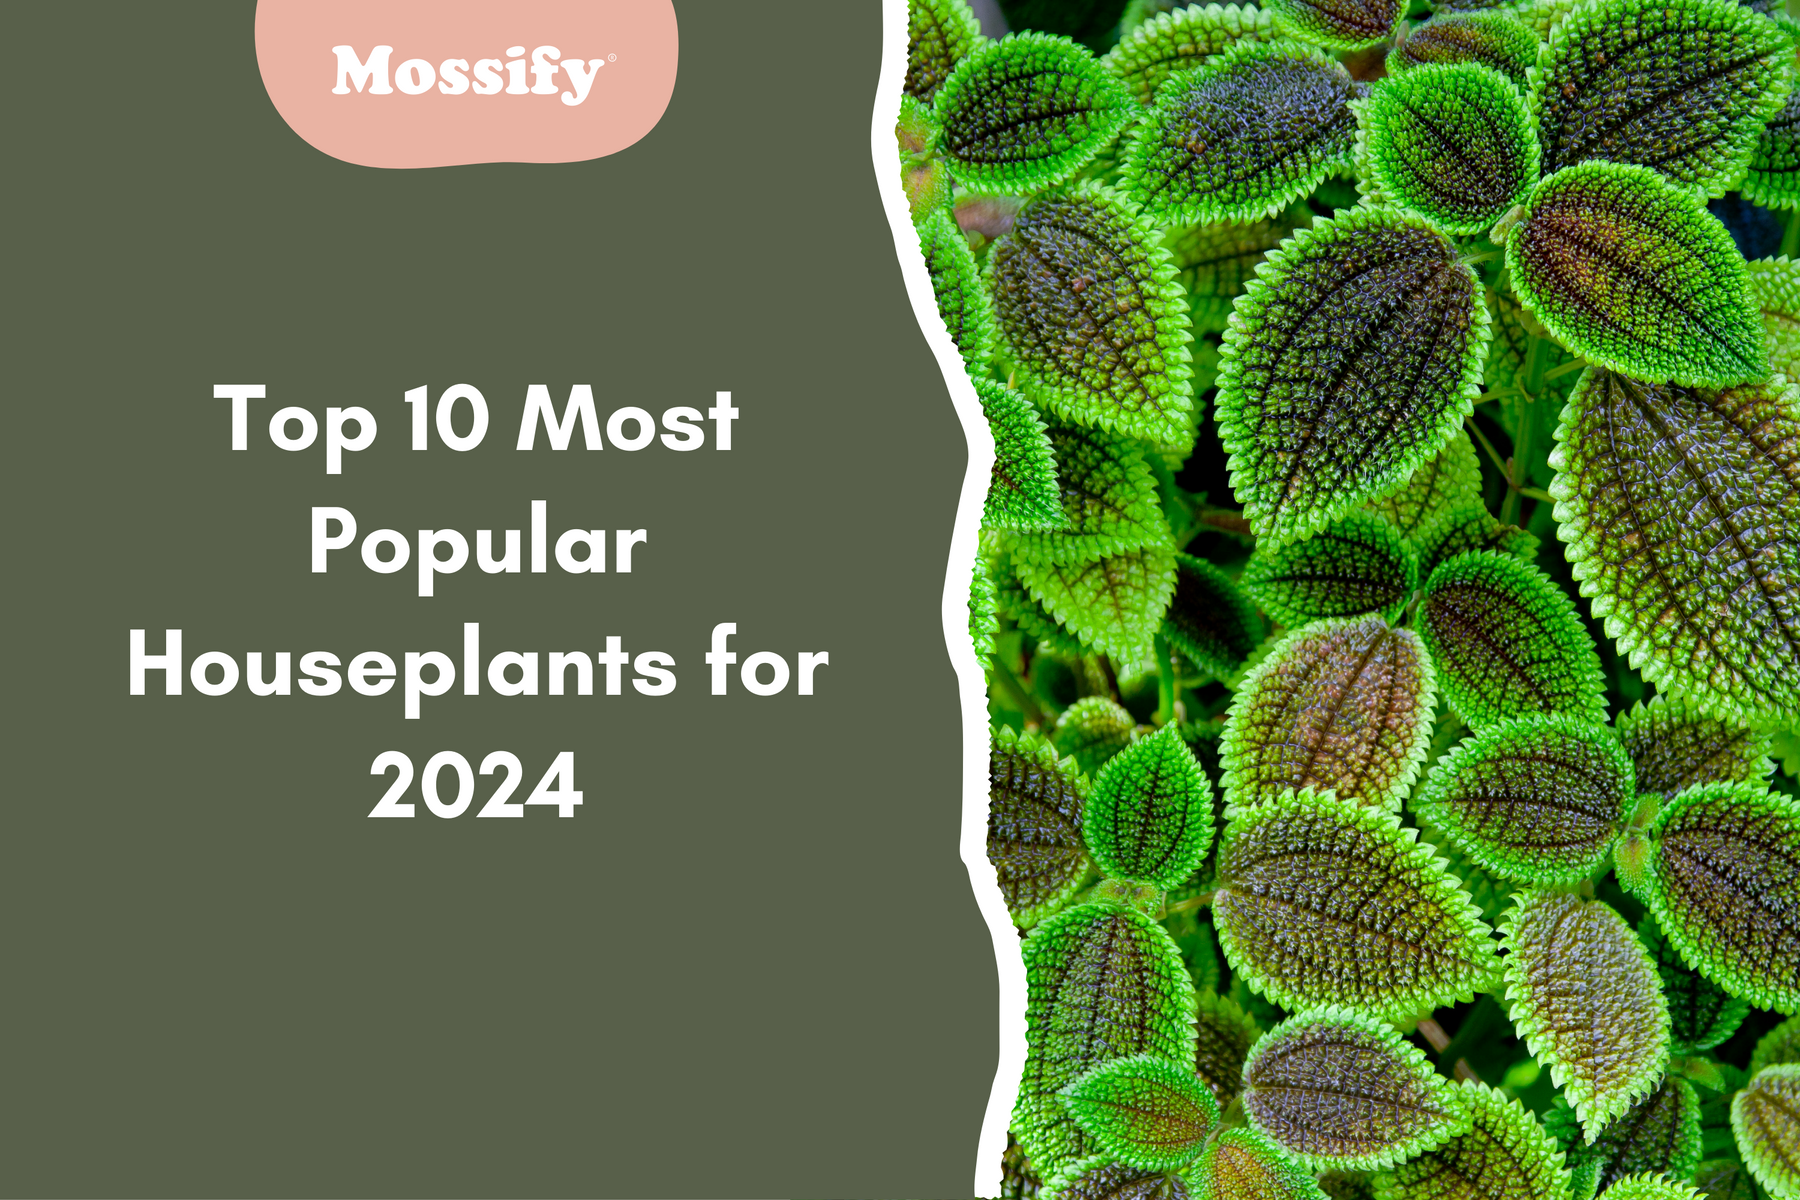 Top 10 Most Popular Houseplants for 2024